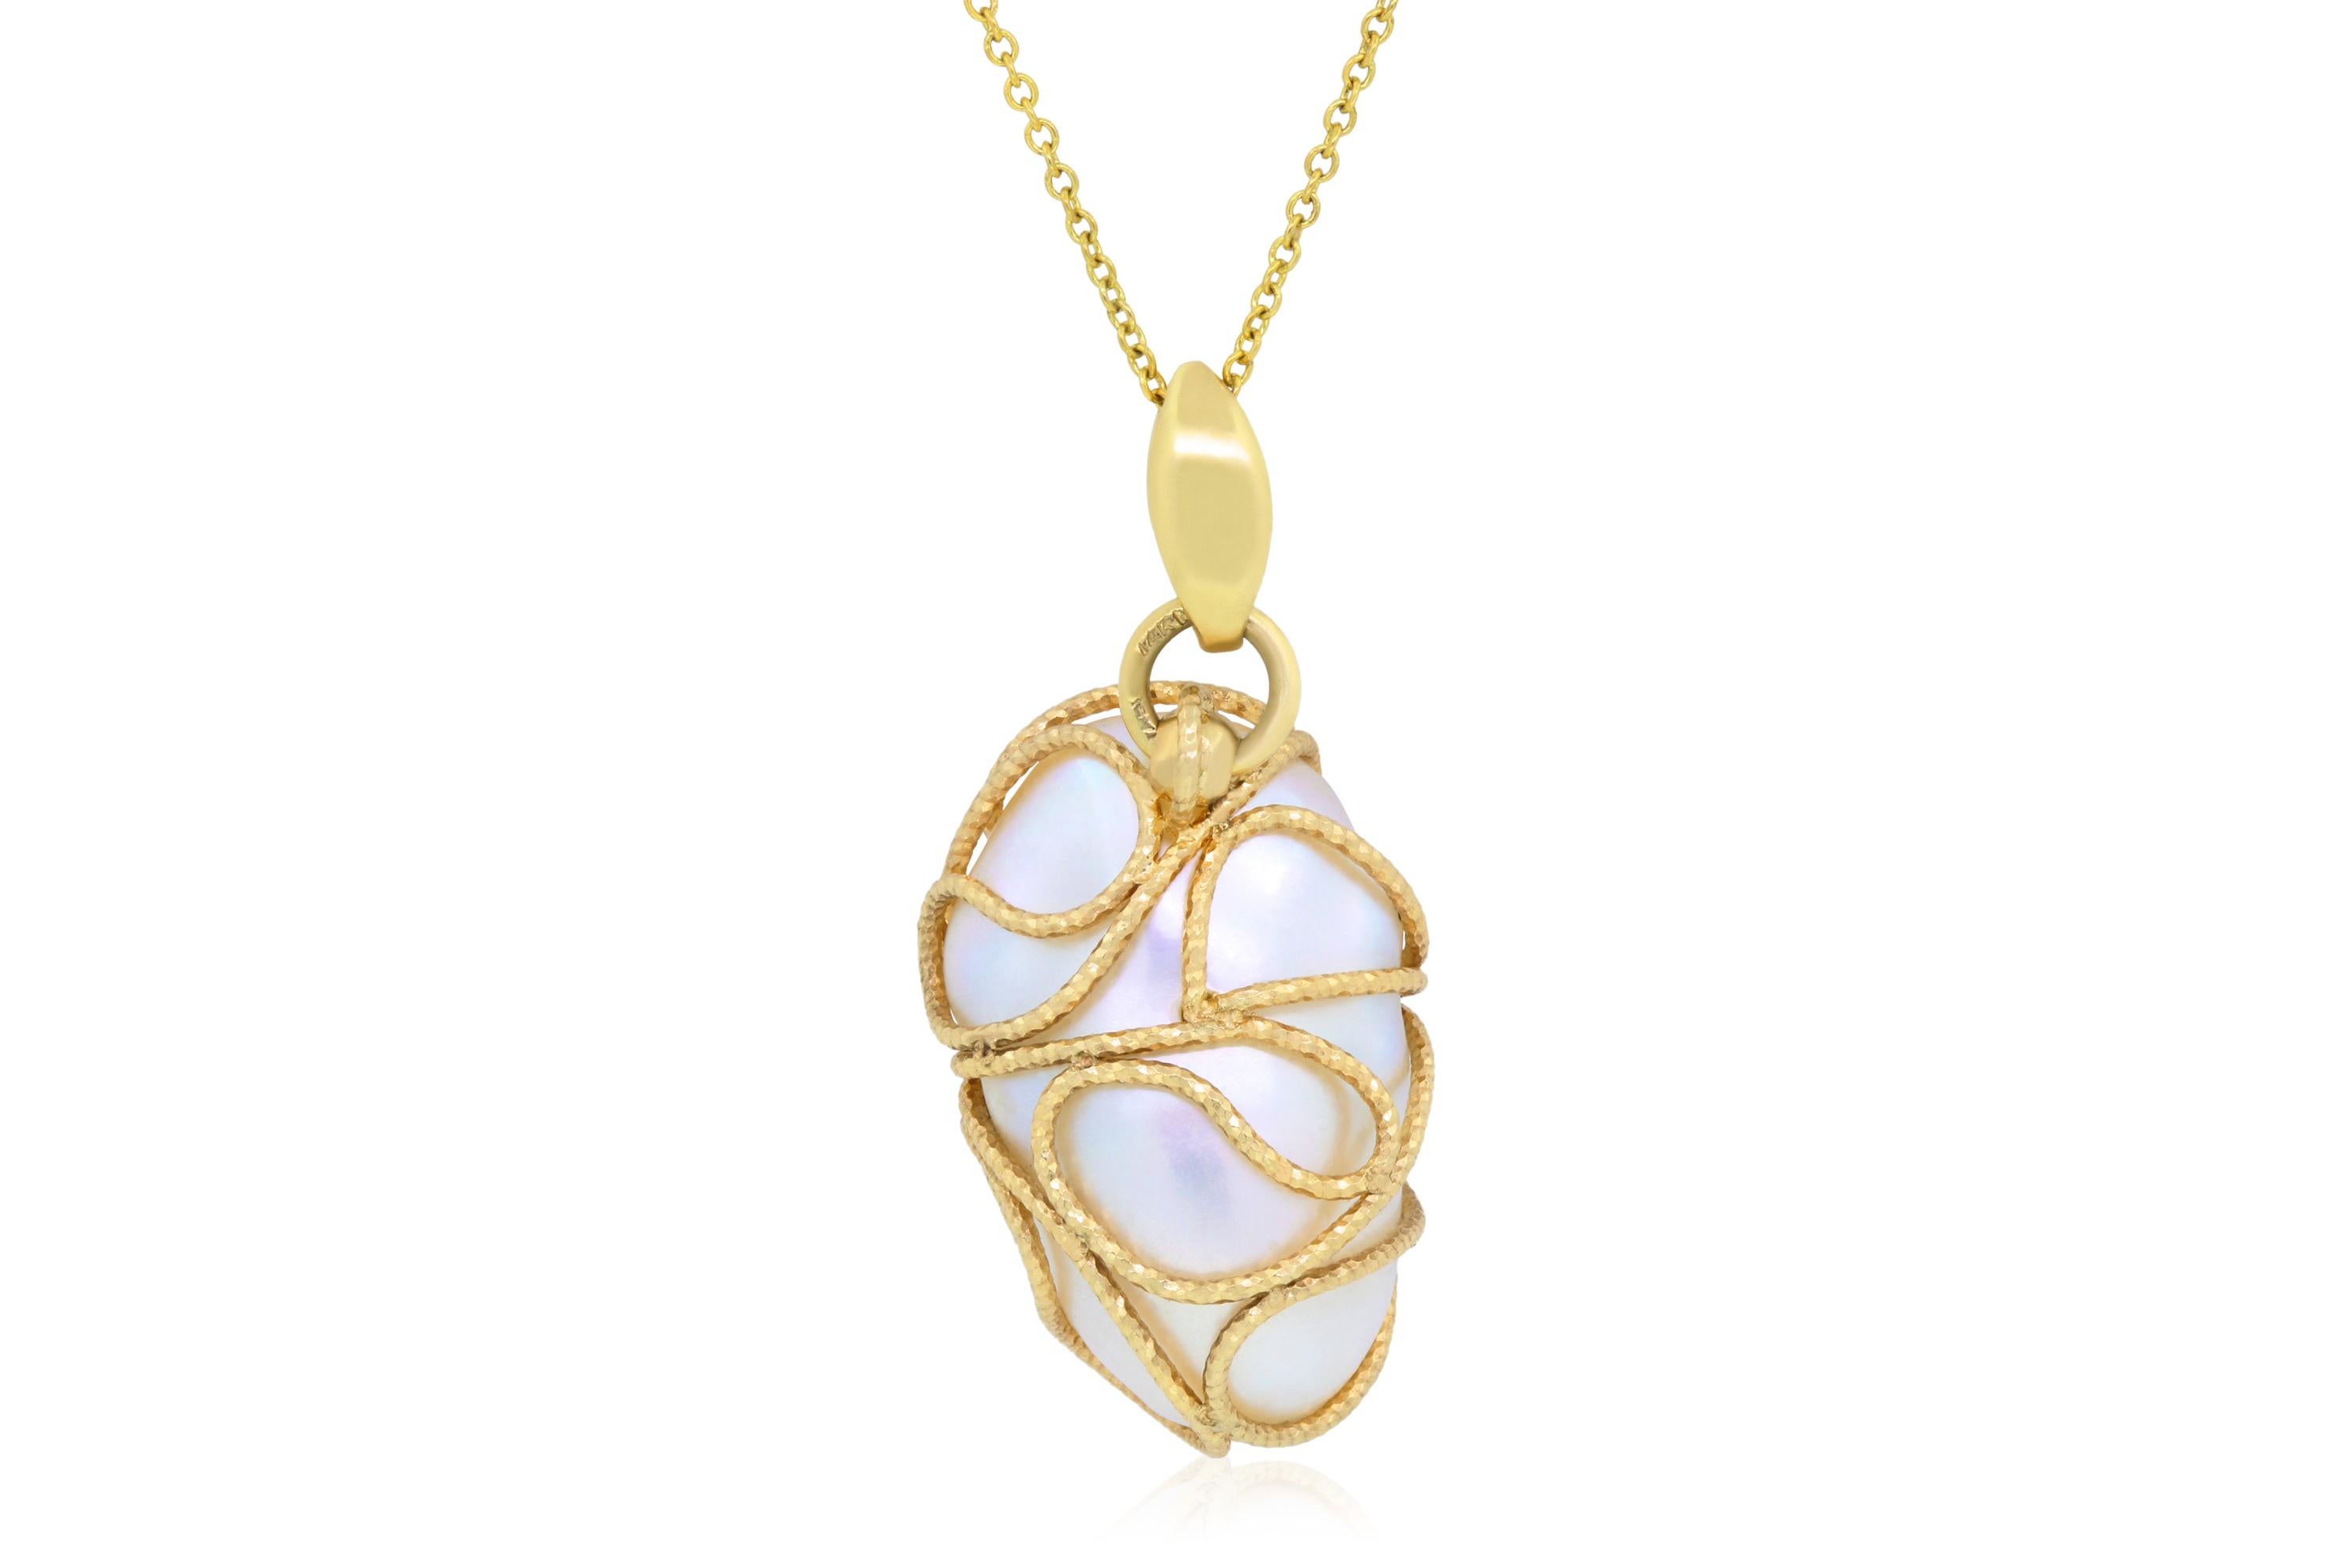 Material: 14K Two-Tone
Center Stone Details: Mother of Pearl

Fine one-of-a-kind craftsmanship meets incredible quality in this breathtaking piece of jewelry.

All Alberto pieces are made in the U.S.A and include a lifetime warranty!